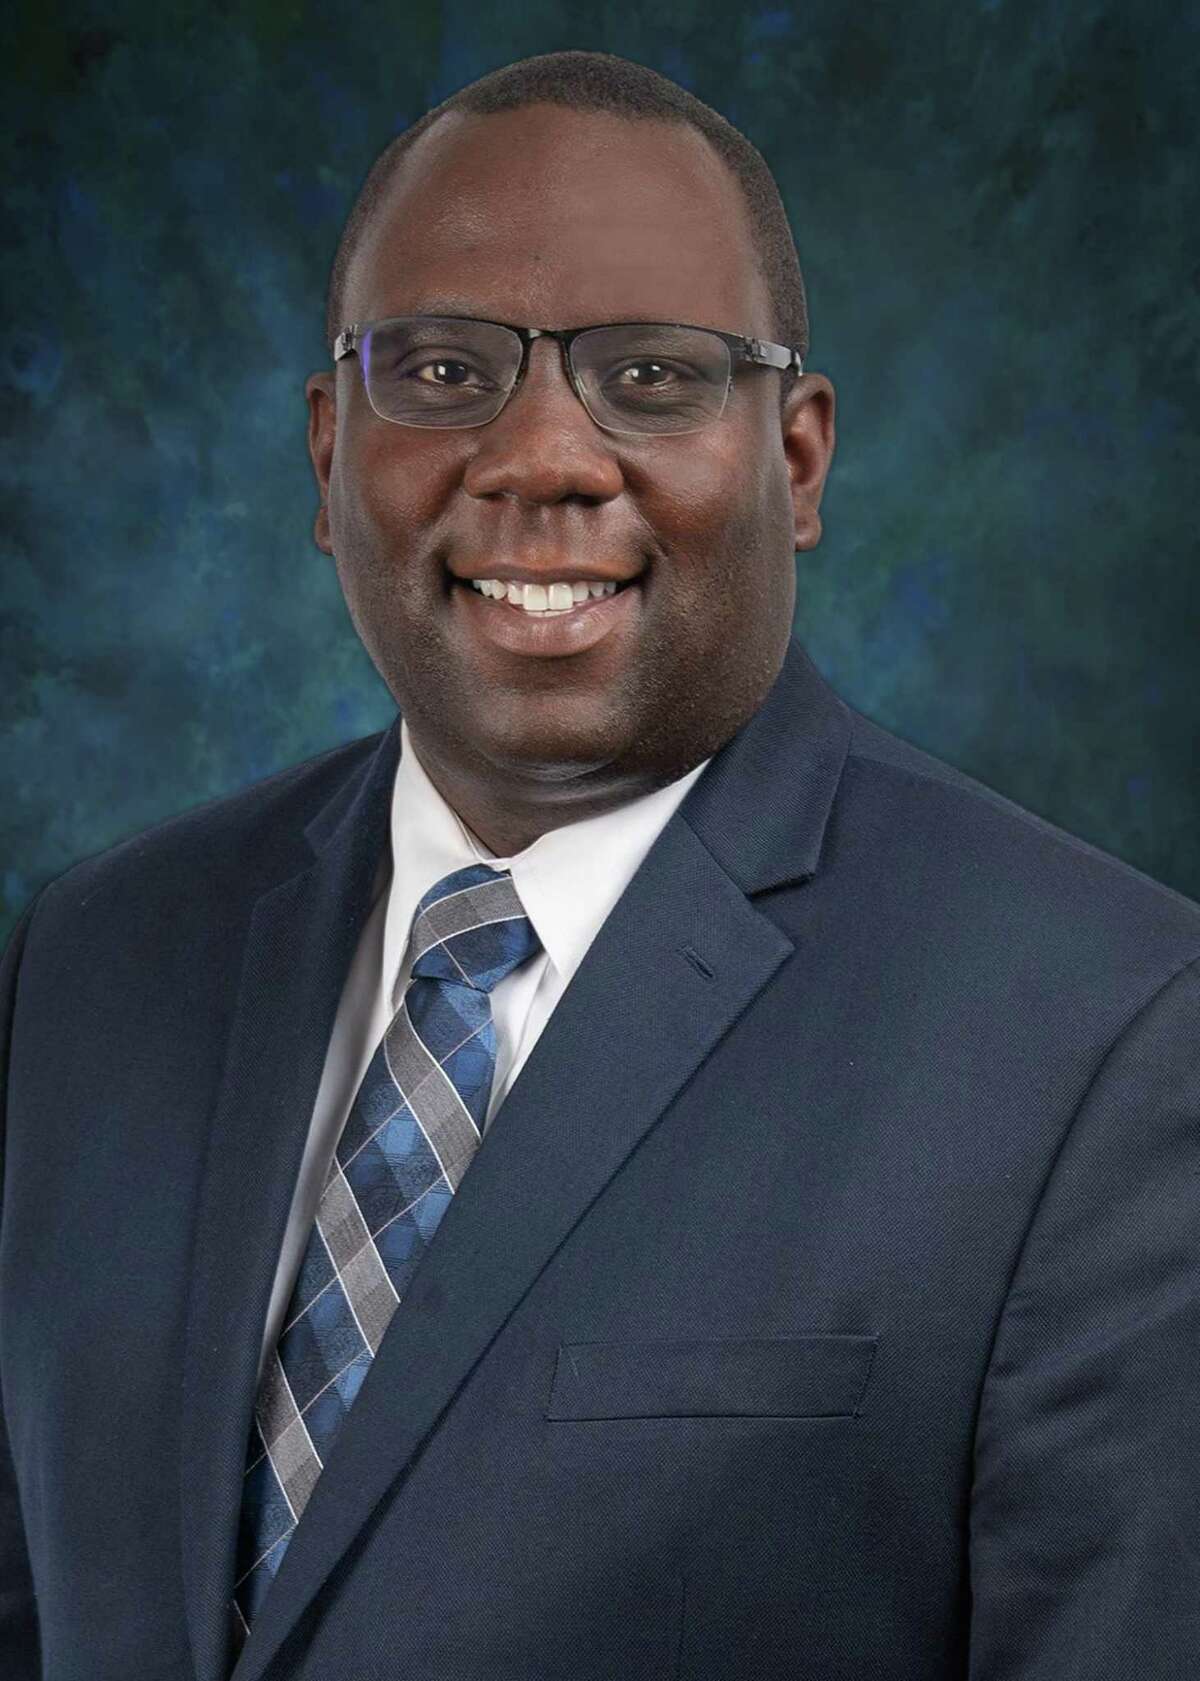 Dr. Plas Williams Jr., associate principal at Cypress Springs High School, was named the new principal at Truitt Middle School on May 3. Williams replaces Yvette Garcia, who will retire in June.